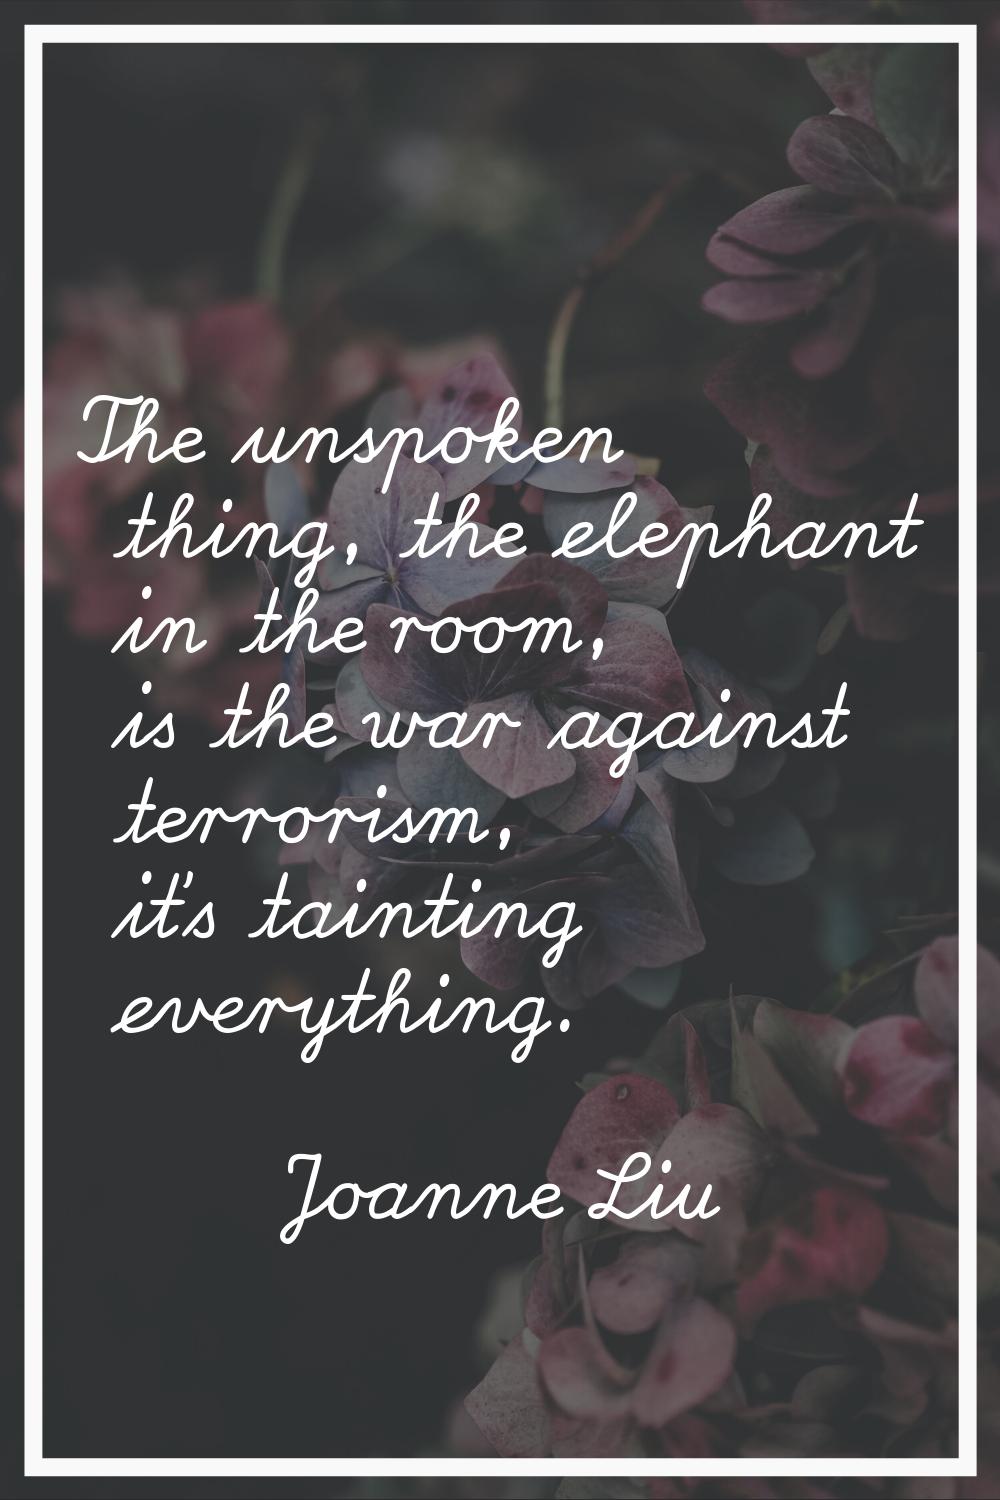 The unspoken thing, the elephant in the room, is the war against terrorism, it's tainting everythin